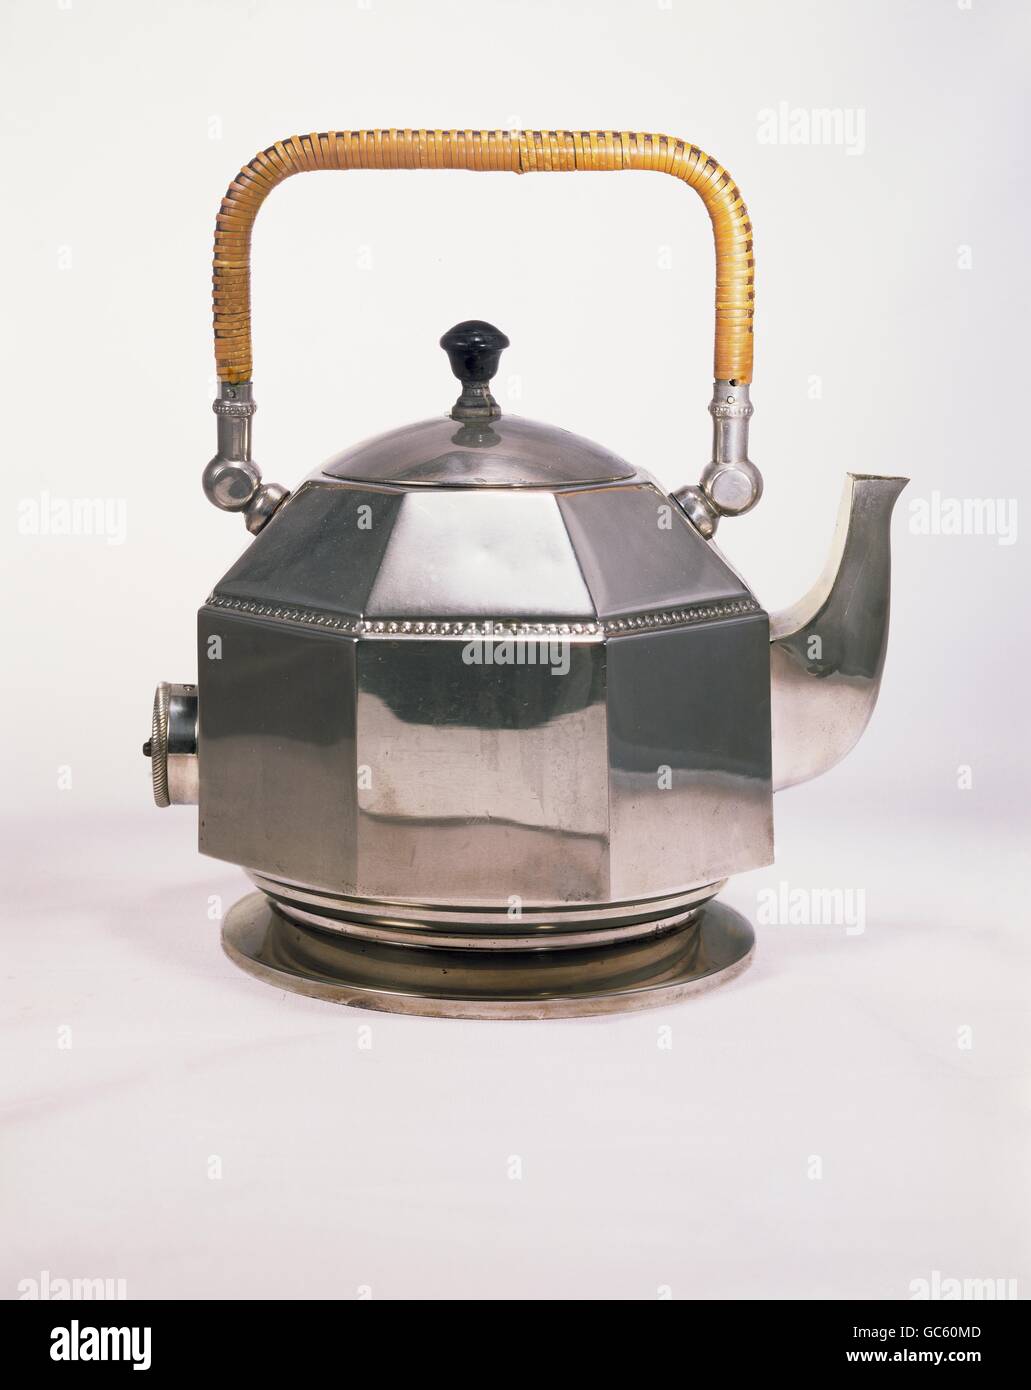 household, kitchen and kitchenware, AEG electric water kettle, white metal, 23 cm x 20.5 cm, design by Peter Behrens (1868 - 1940), Berlin, Germany, circa 1905 / 1910, Additional-Rights-Clearences-Not Available Stock Photo